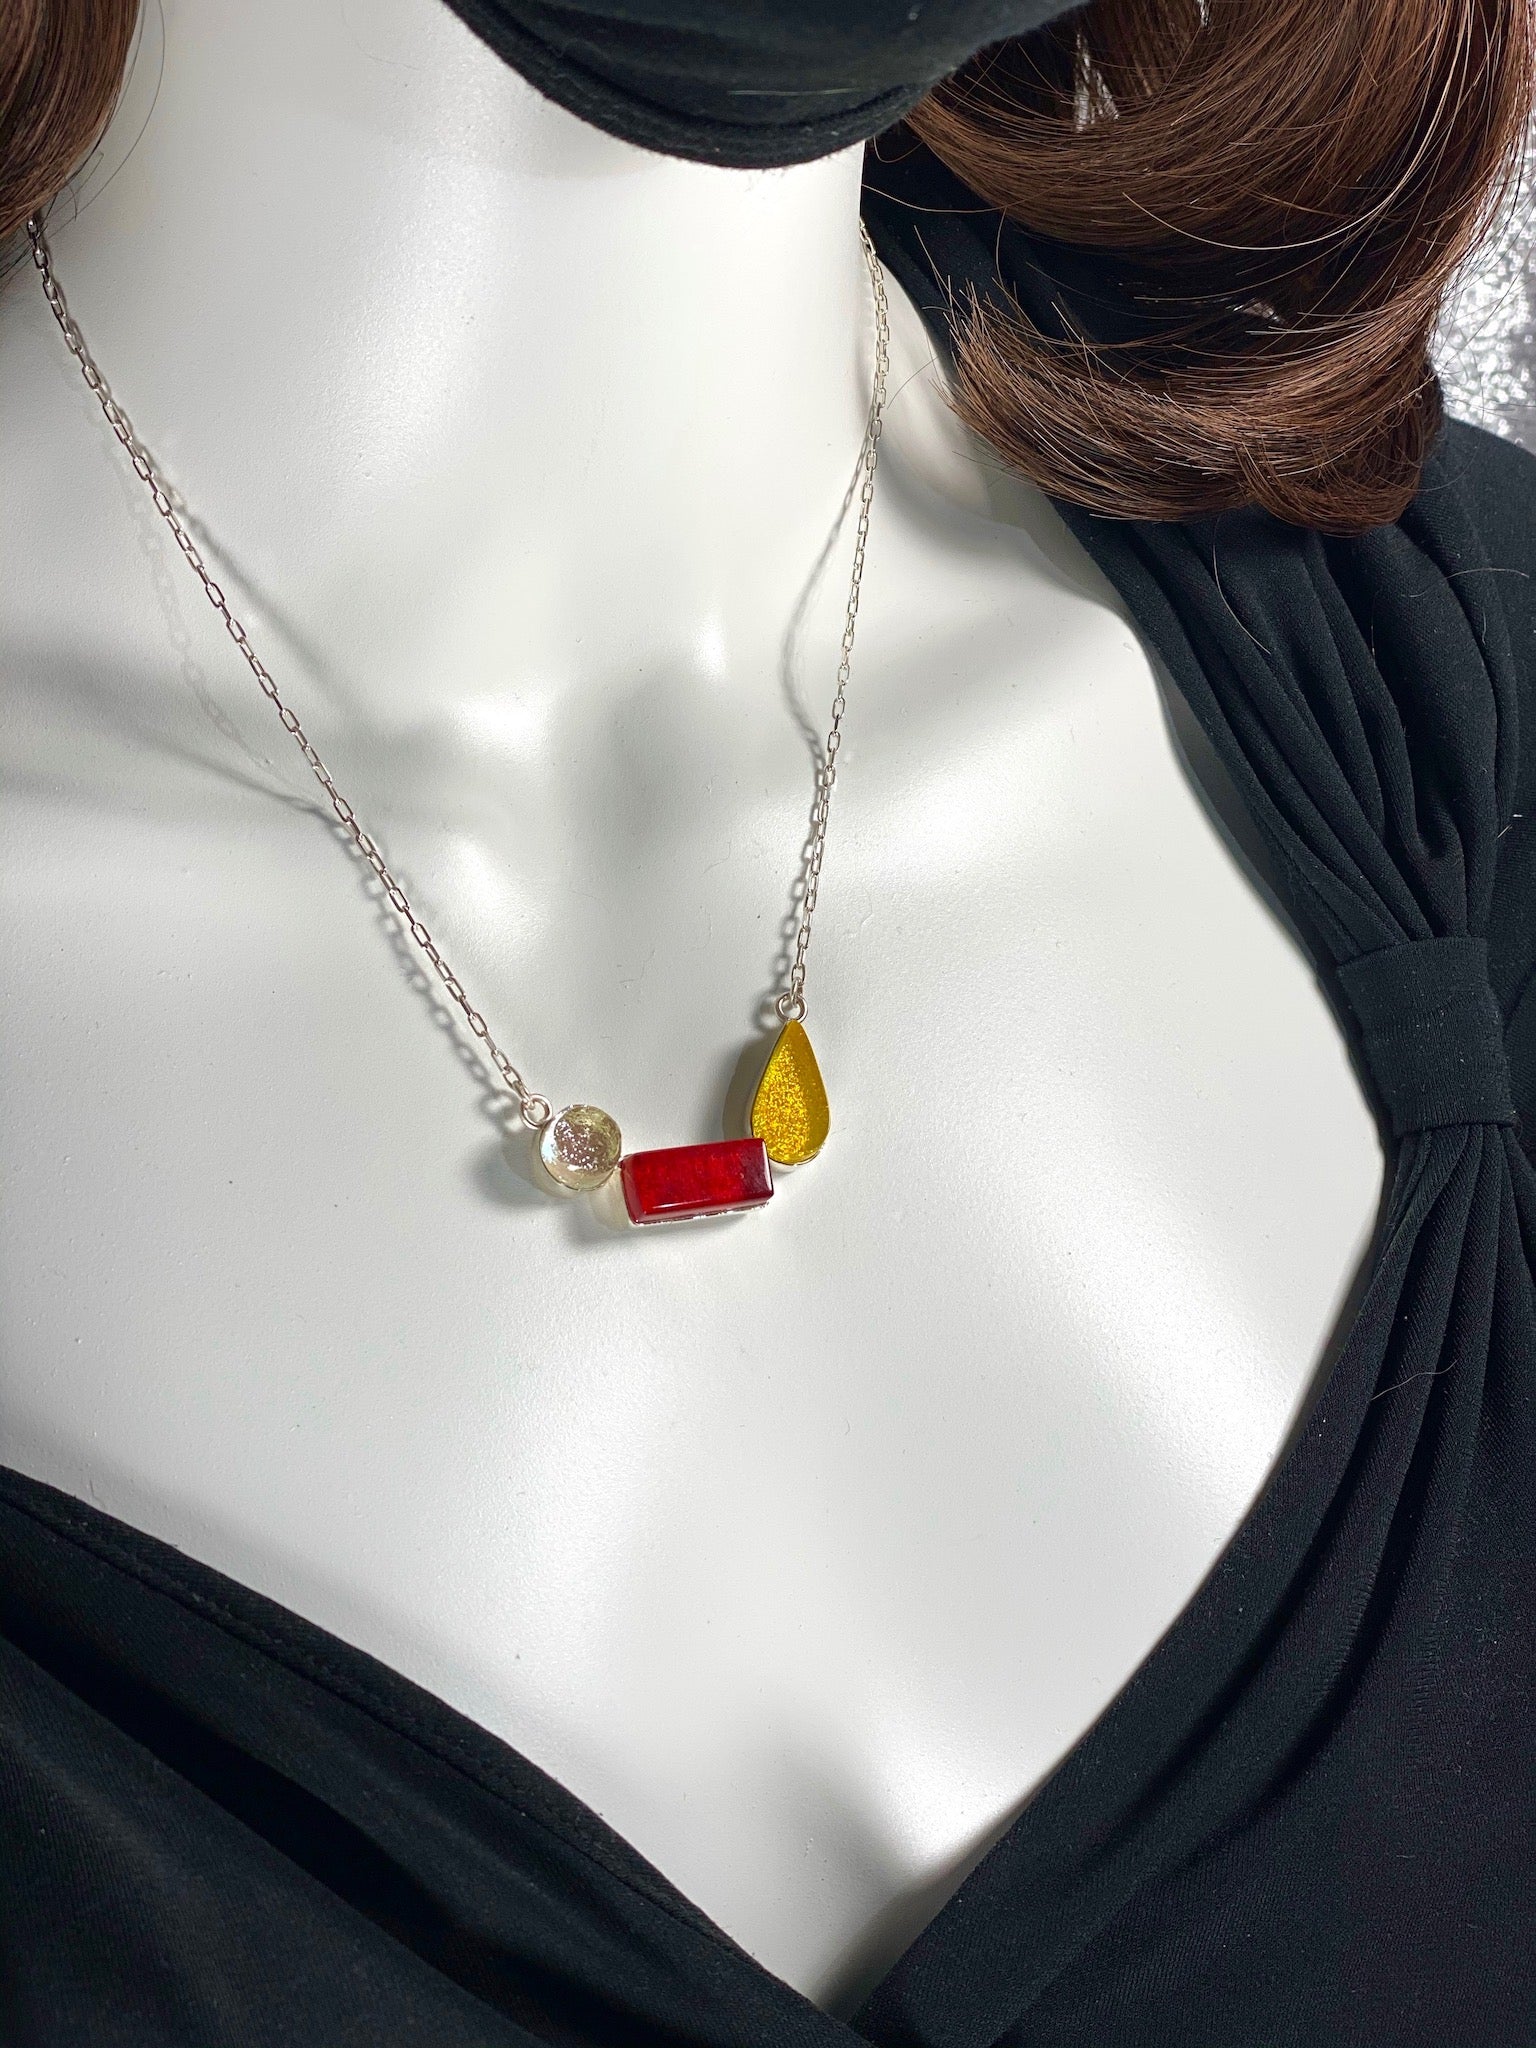 modern art inspired 3 element necklace, white, red, yellow, fused glass, glass jewelry, glass and silver jewelry, handmade, handcrafted, American Craft, hand fabricated jewelry, hand fabricated jewellery, Athen, Georgia, colorful jewelry, sparkle, bullseye glass, dichroic glass, art jewelry